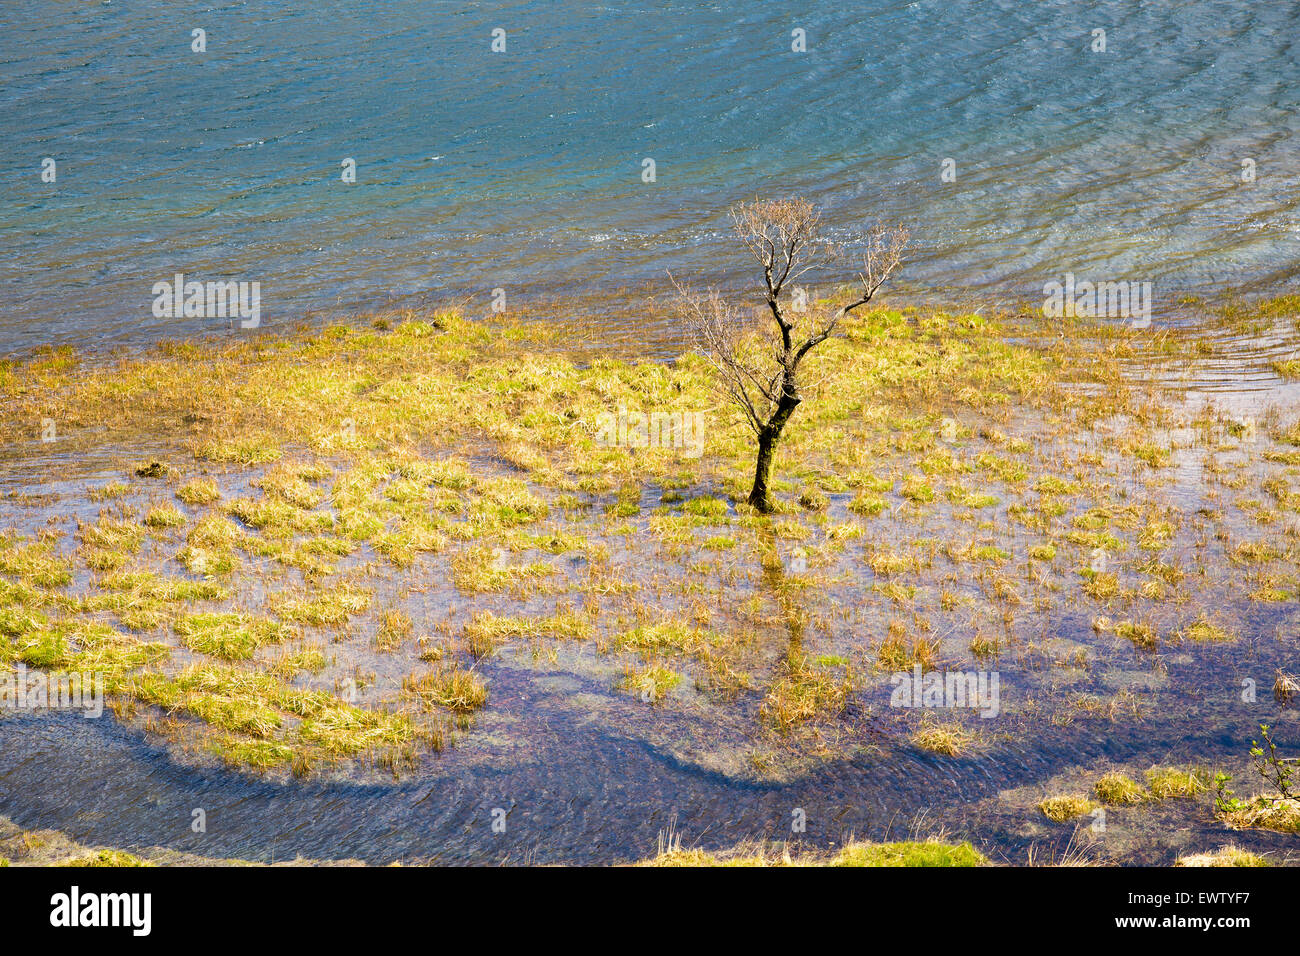 High water level flooding land, Lake Buttermere, Lake District national park, Cumbria, England, UK Stock Photo